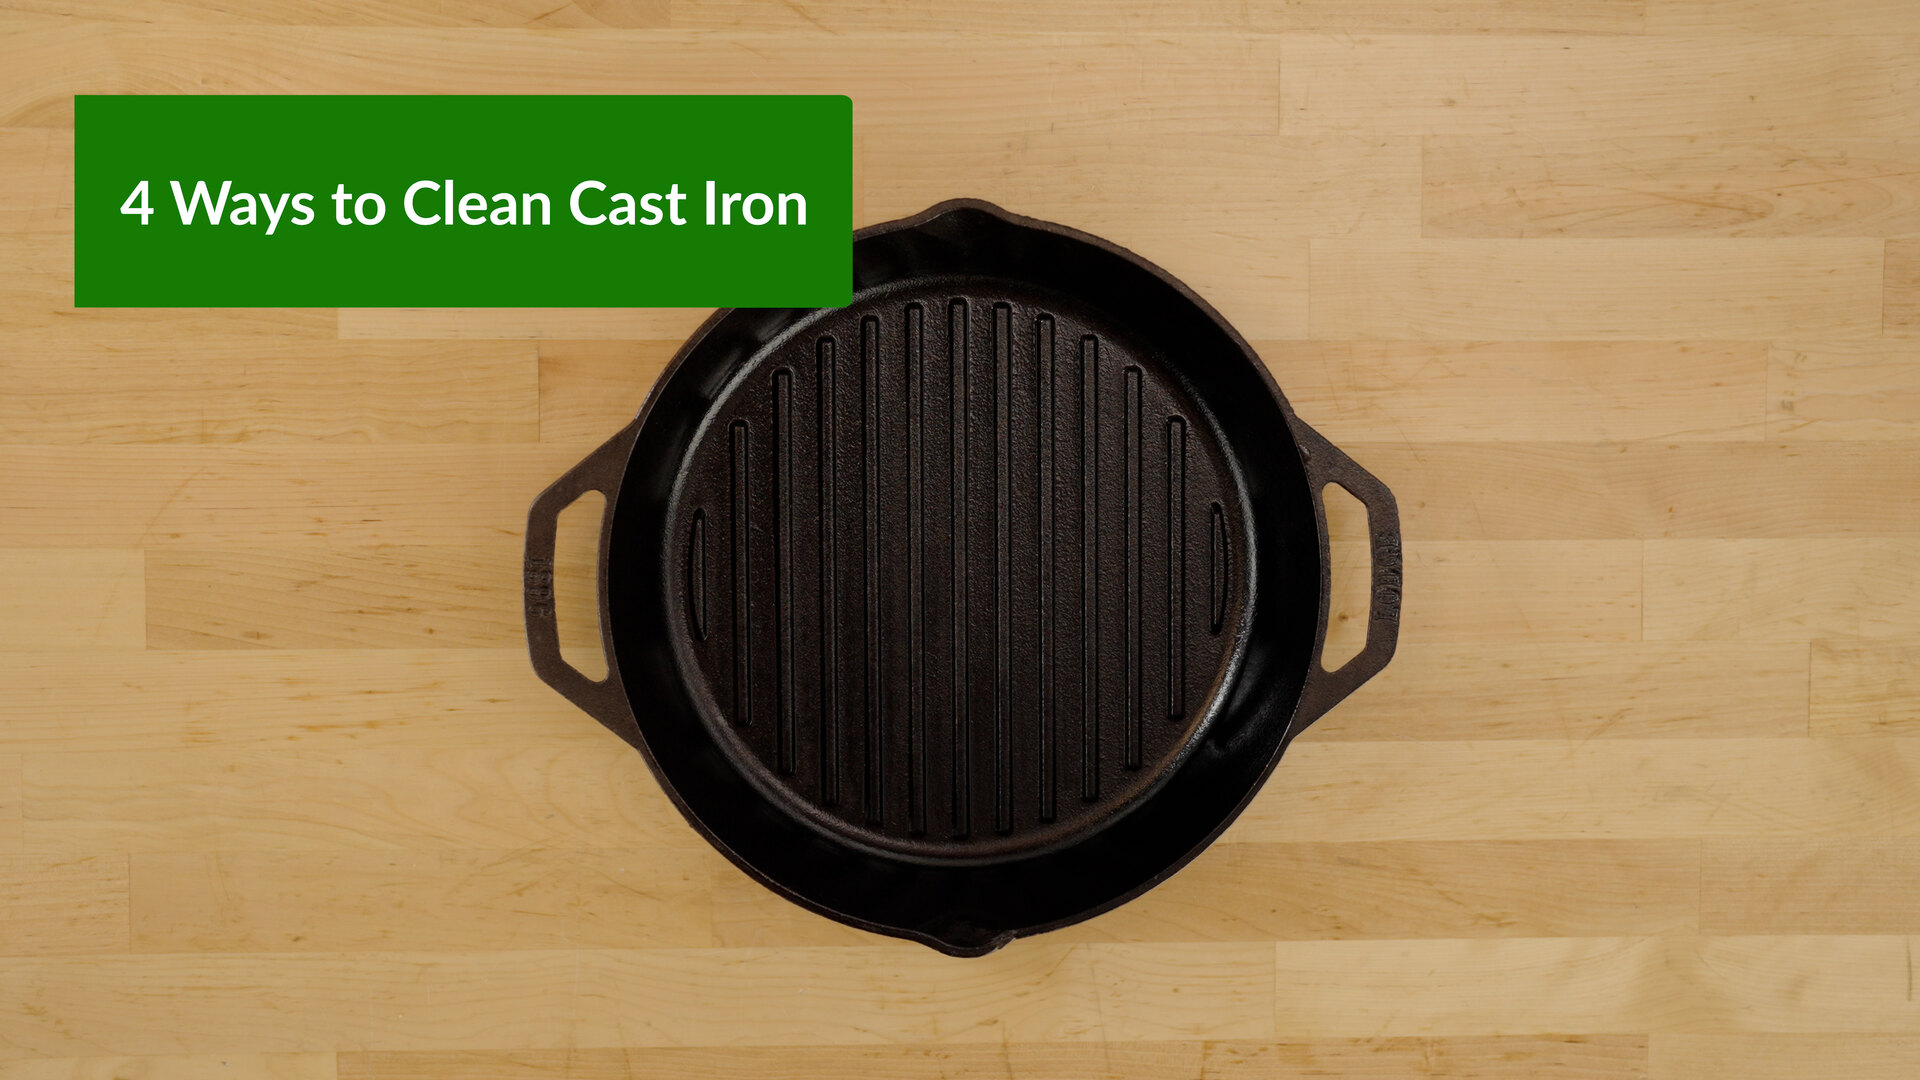 Lodge L8GPL 10 1/4 Pre-Seasoned Cast Iron Grill Pan with Dual